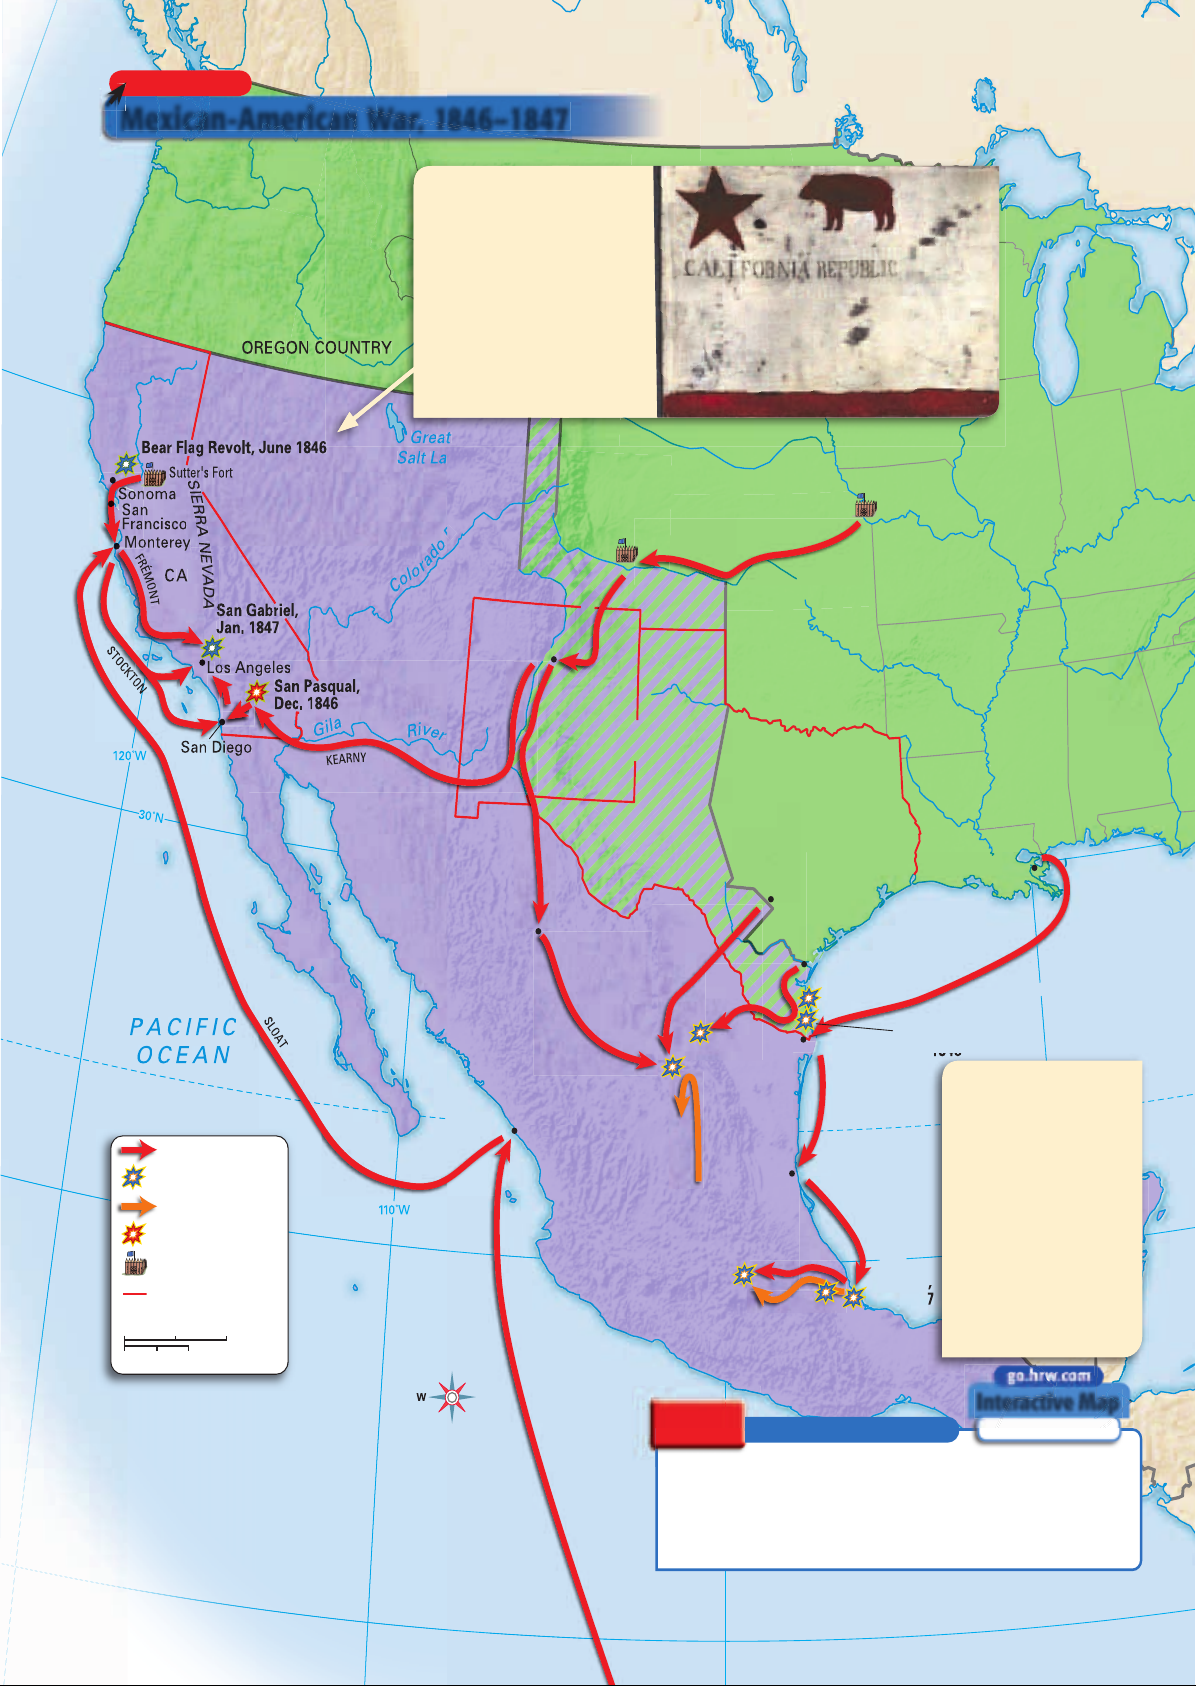 US_History_Textbook_8th_Grade_Chapter_10_Expanding_West_Part_1 Image-15